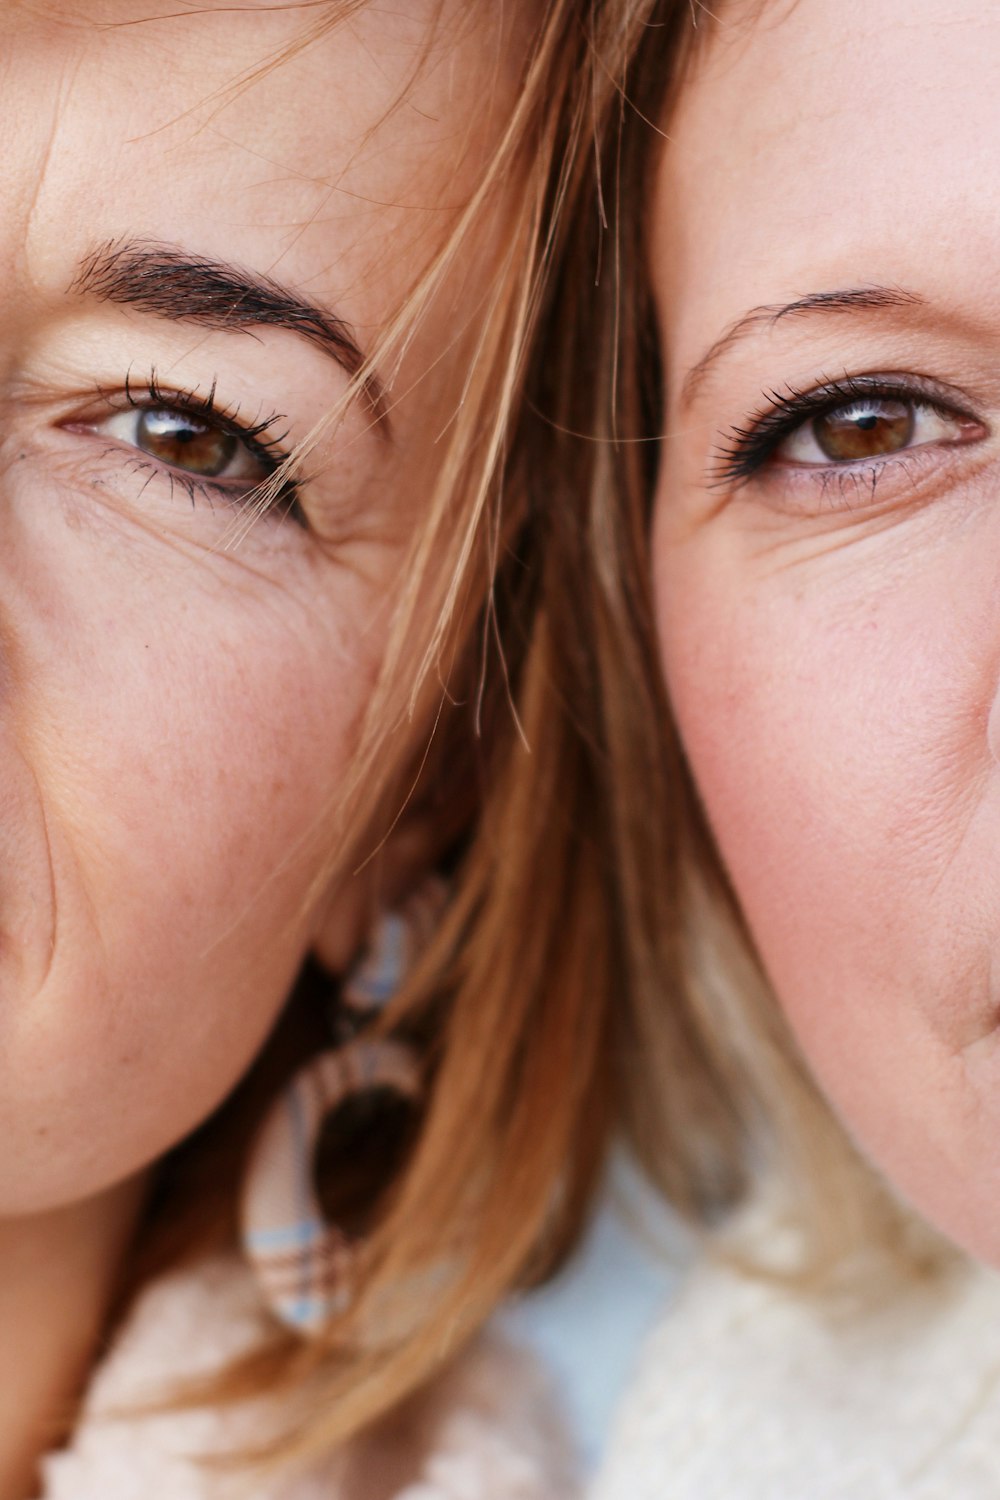 a close up of two women with brown eyes